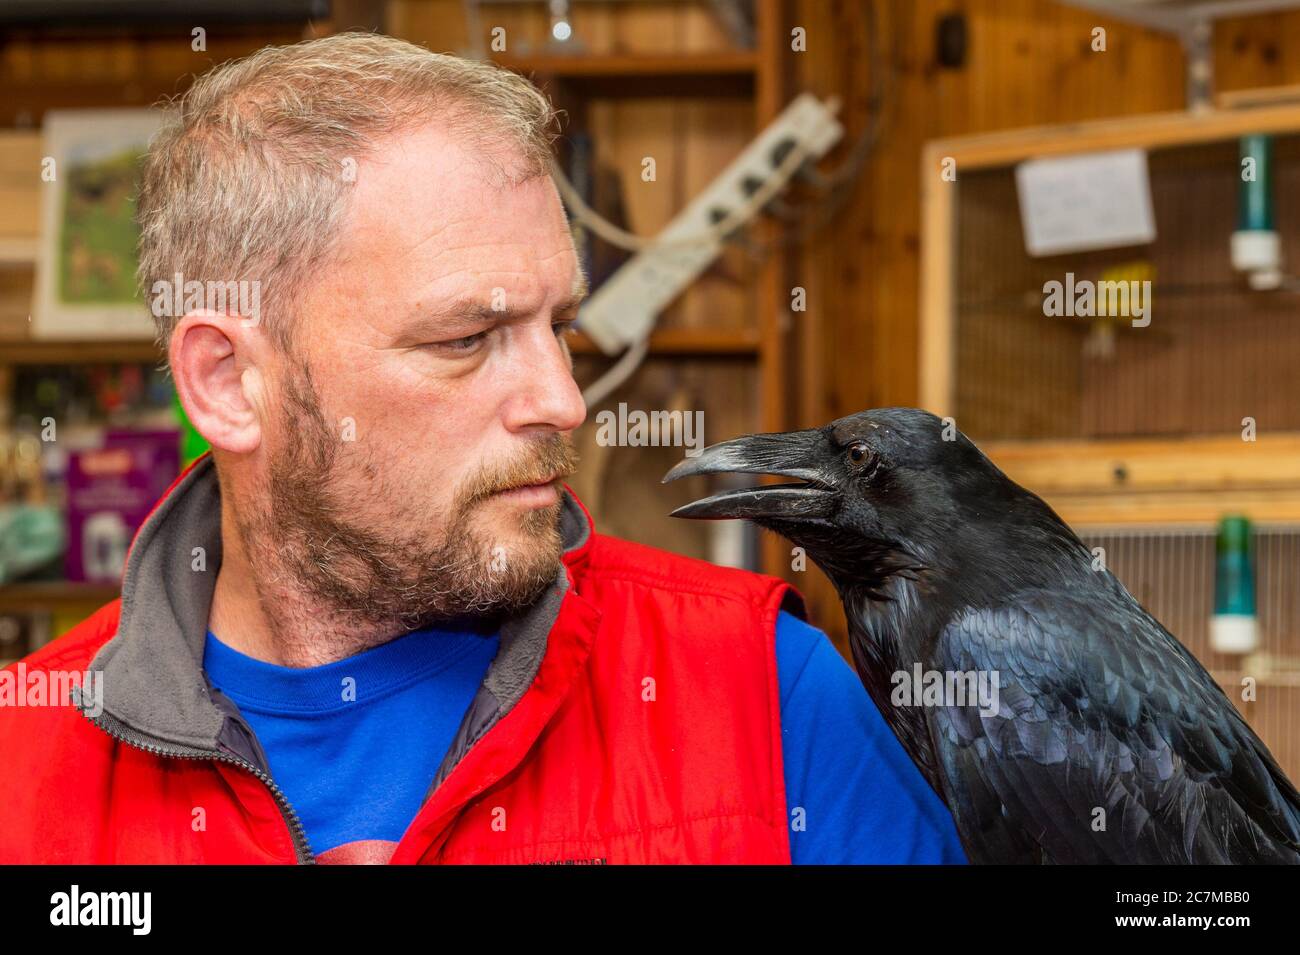 Bantry, West Cork, Ireland. 18th Jul, 2020. Bantry Pet and Equine Pet Shop, owned and run by Gemma Dale, was host to 2 Ravens this morning. The Ravens have been rehabilitated by Scythe O'Brien of Ravenstone Rehab Centre after they were sent to her by Bantry based vet, Fachtna Collins. Because of their on-going health issues, the birds cannot be released into the wild and therefore stay at the Rehab Centre as long term residents. The centre is not a charity and is funded wholly by Scythe O'Brien. Manitou the Ravem is pictured with Darren Hand of Approved Raw Pet Foods. Credit: AG News/Alamy Li Stock Photo